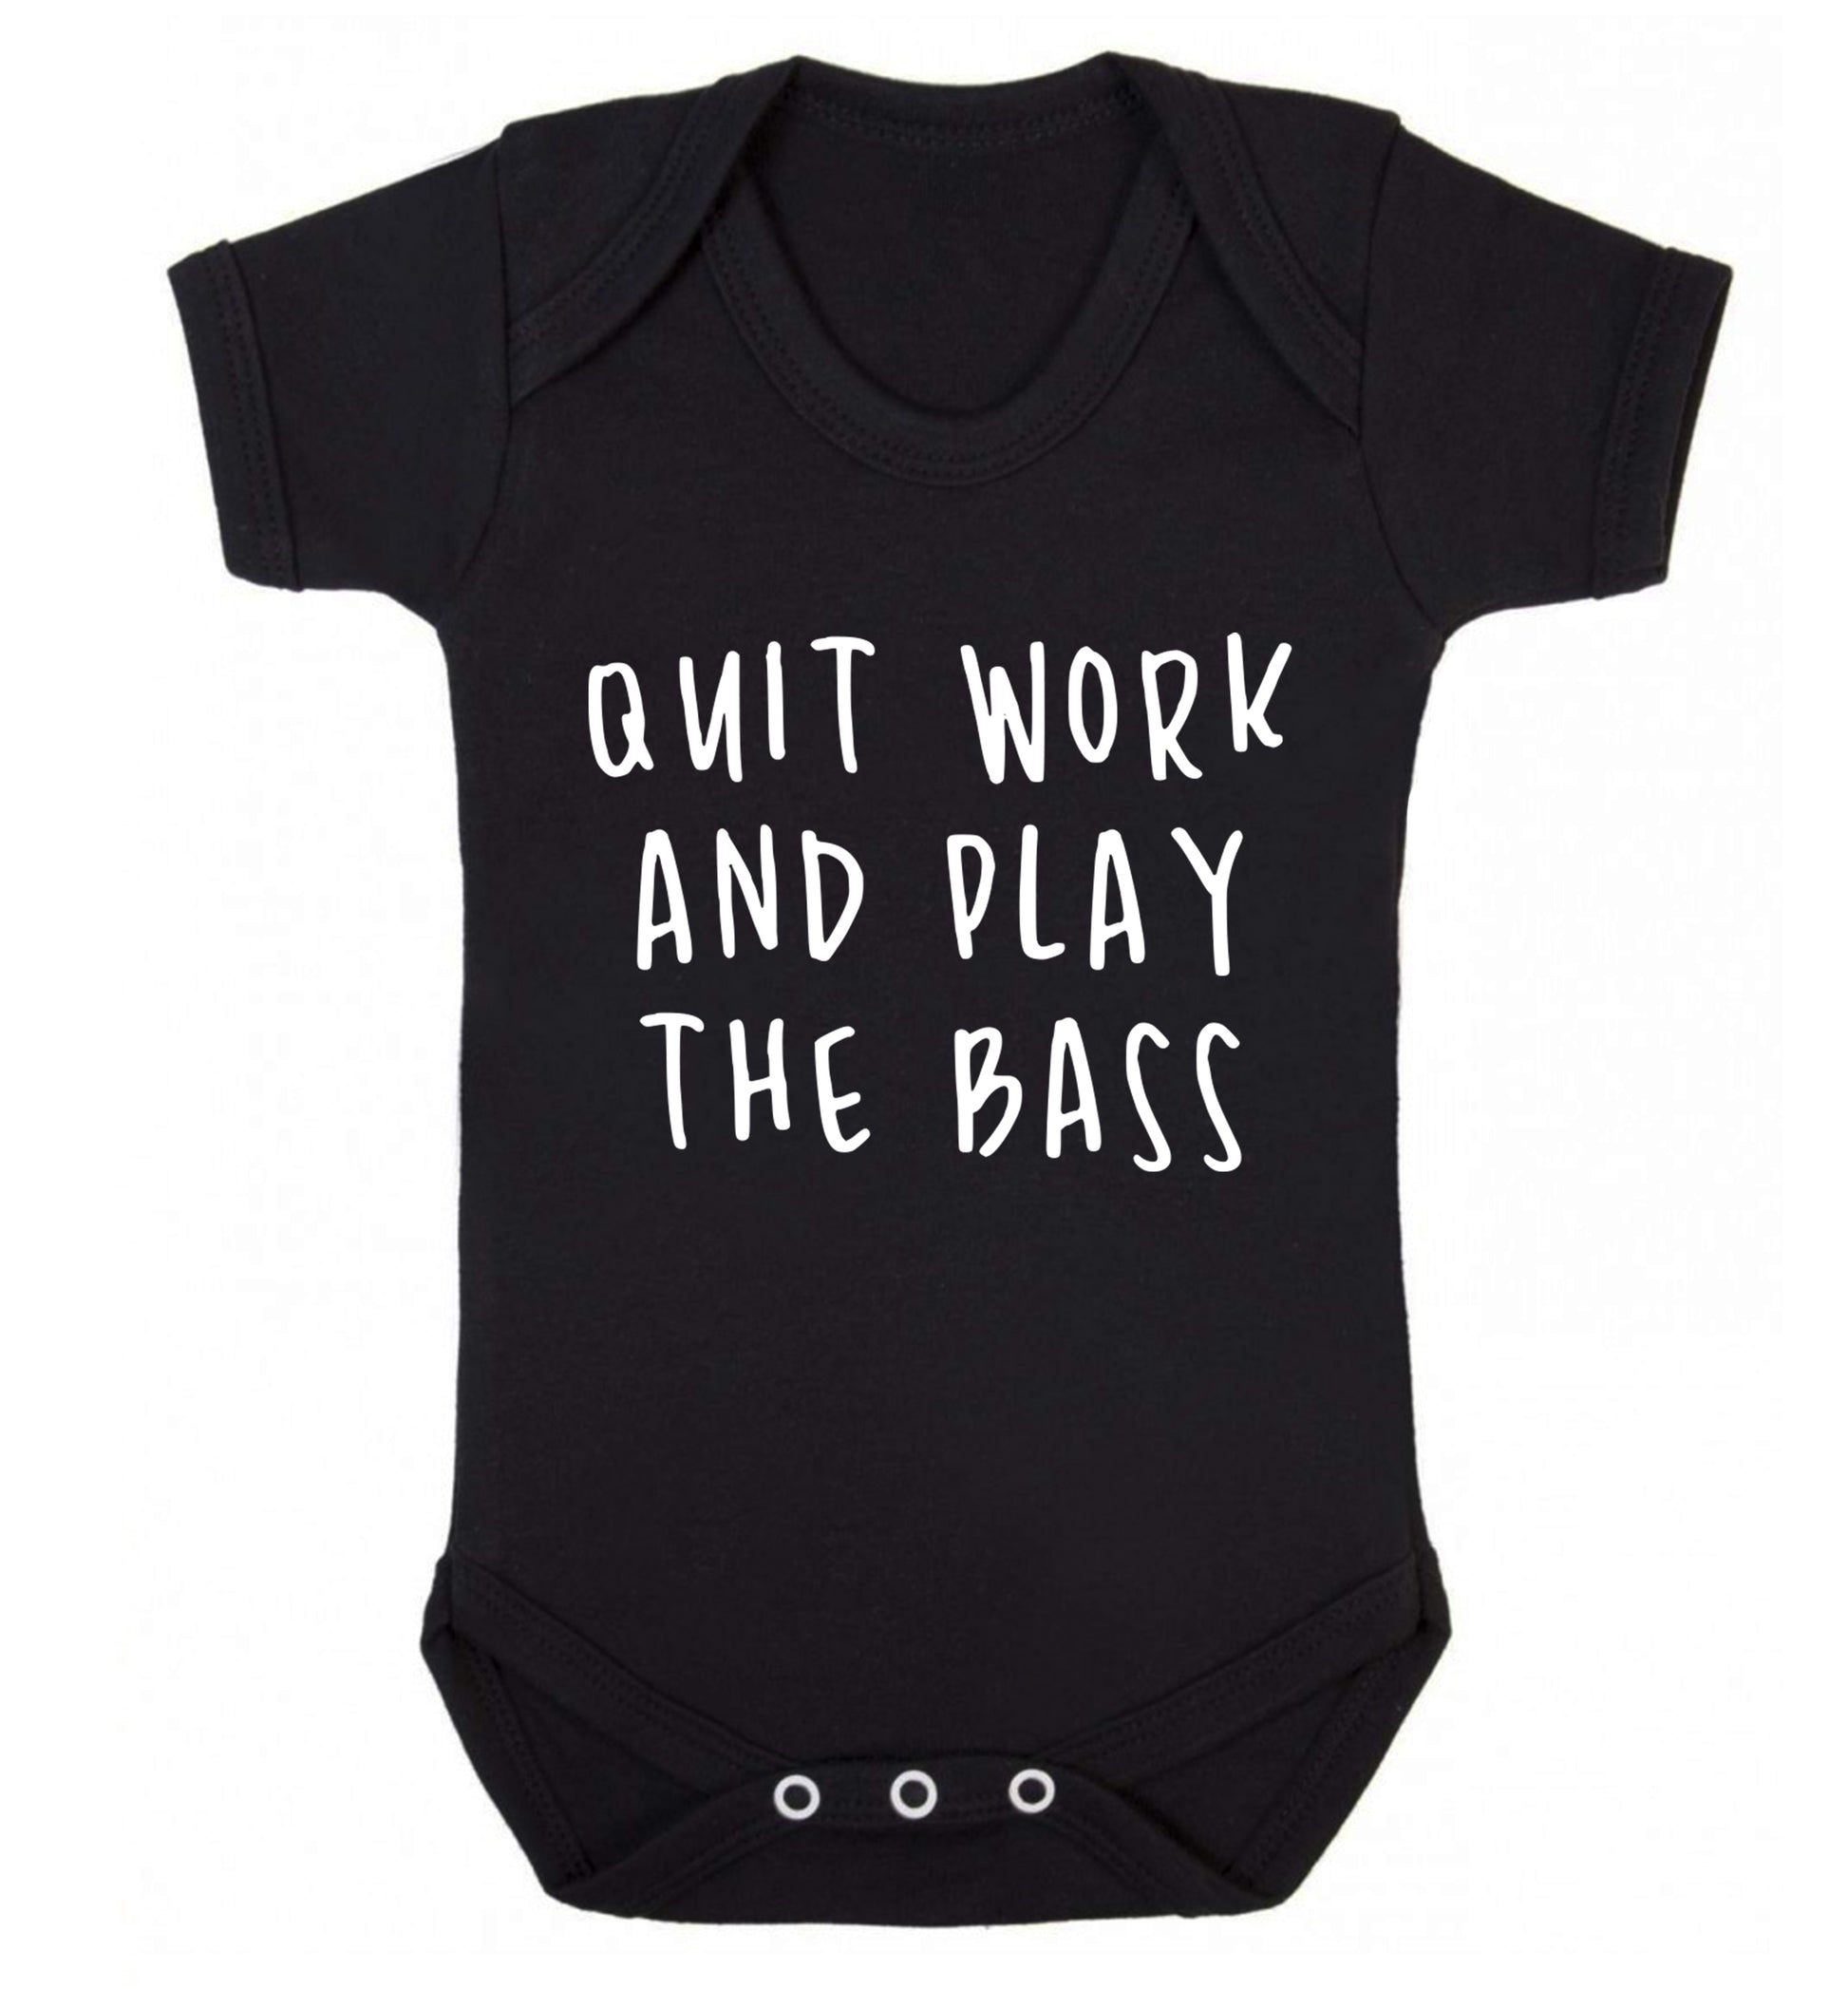 Quit work and play the bass Baby Vest black 18-24 months